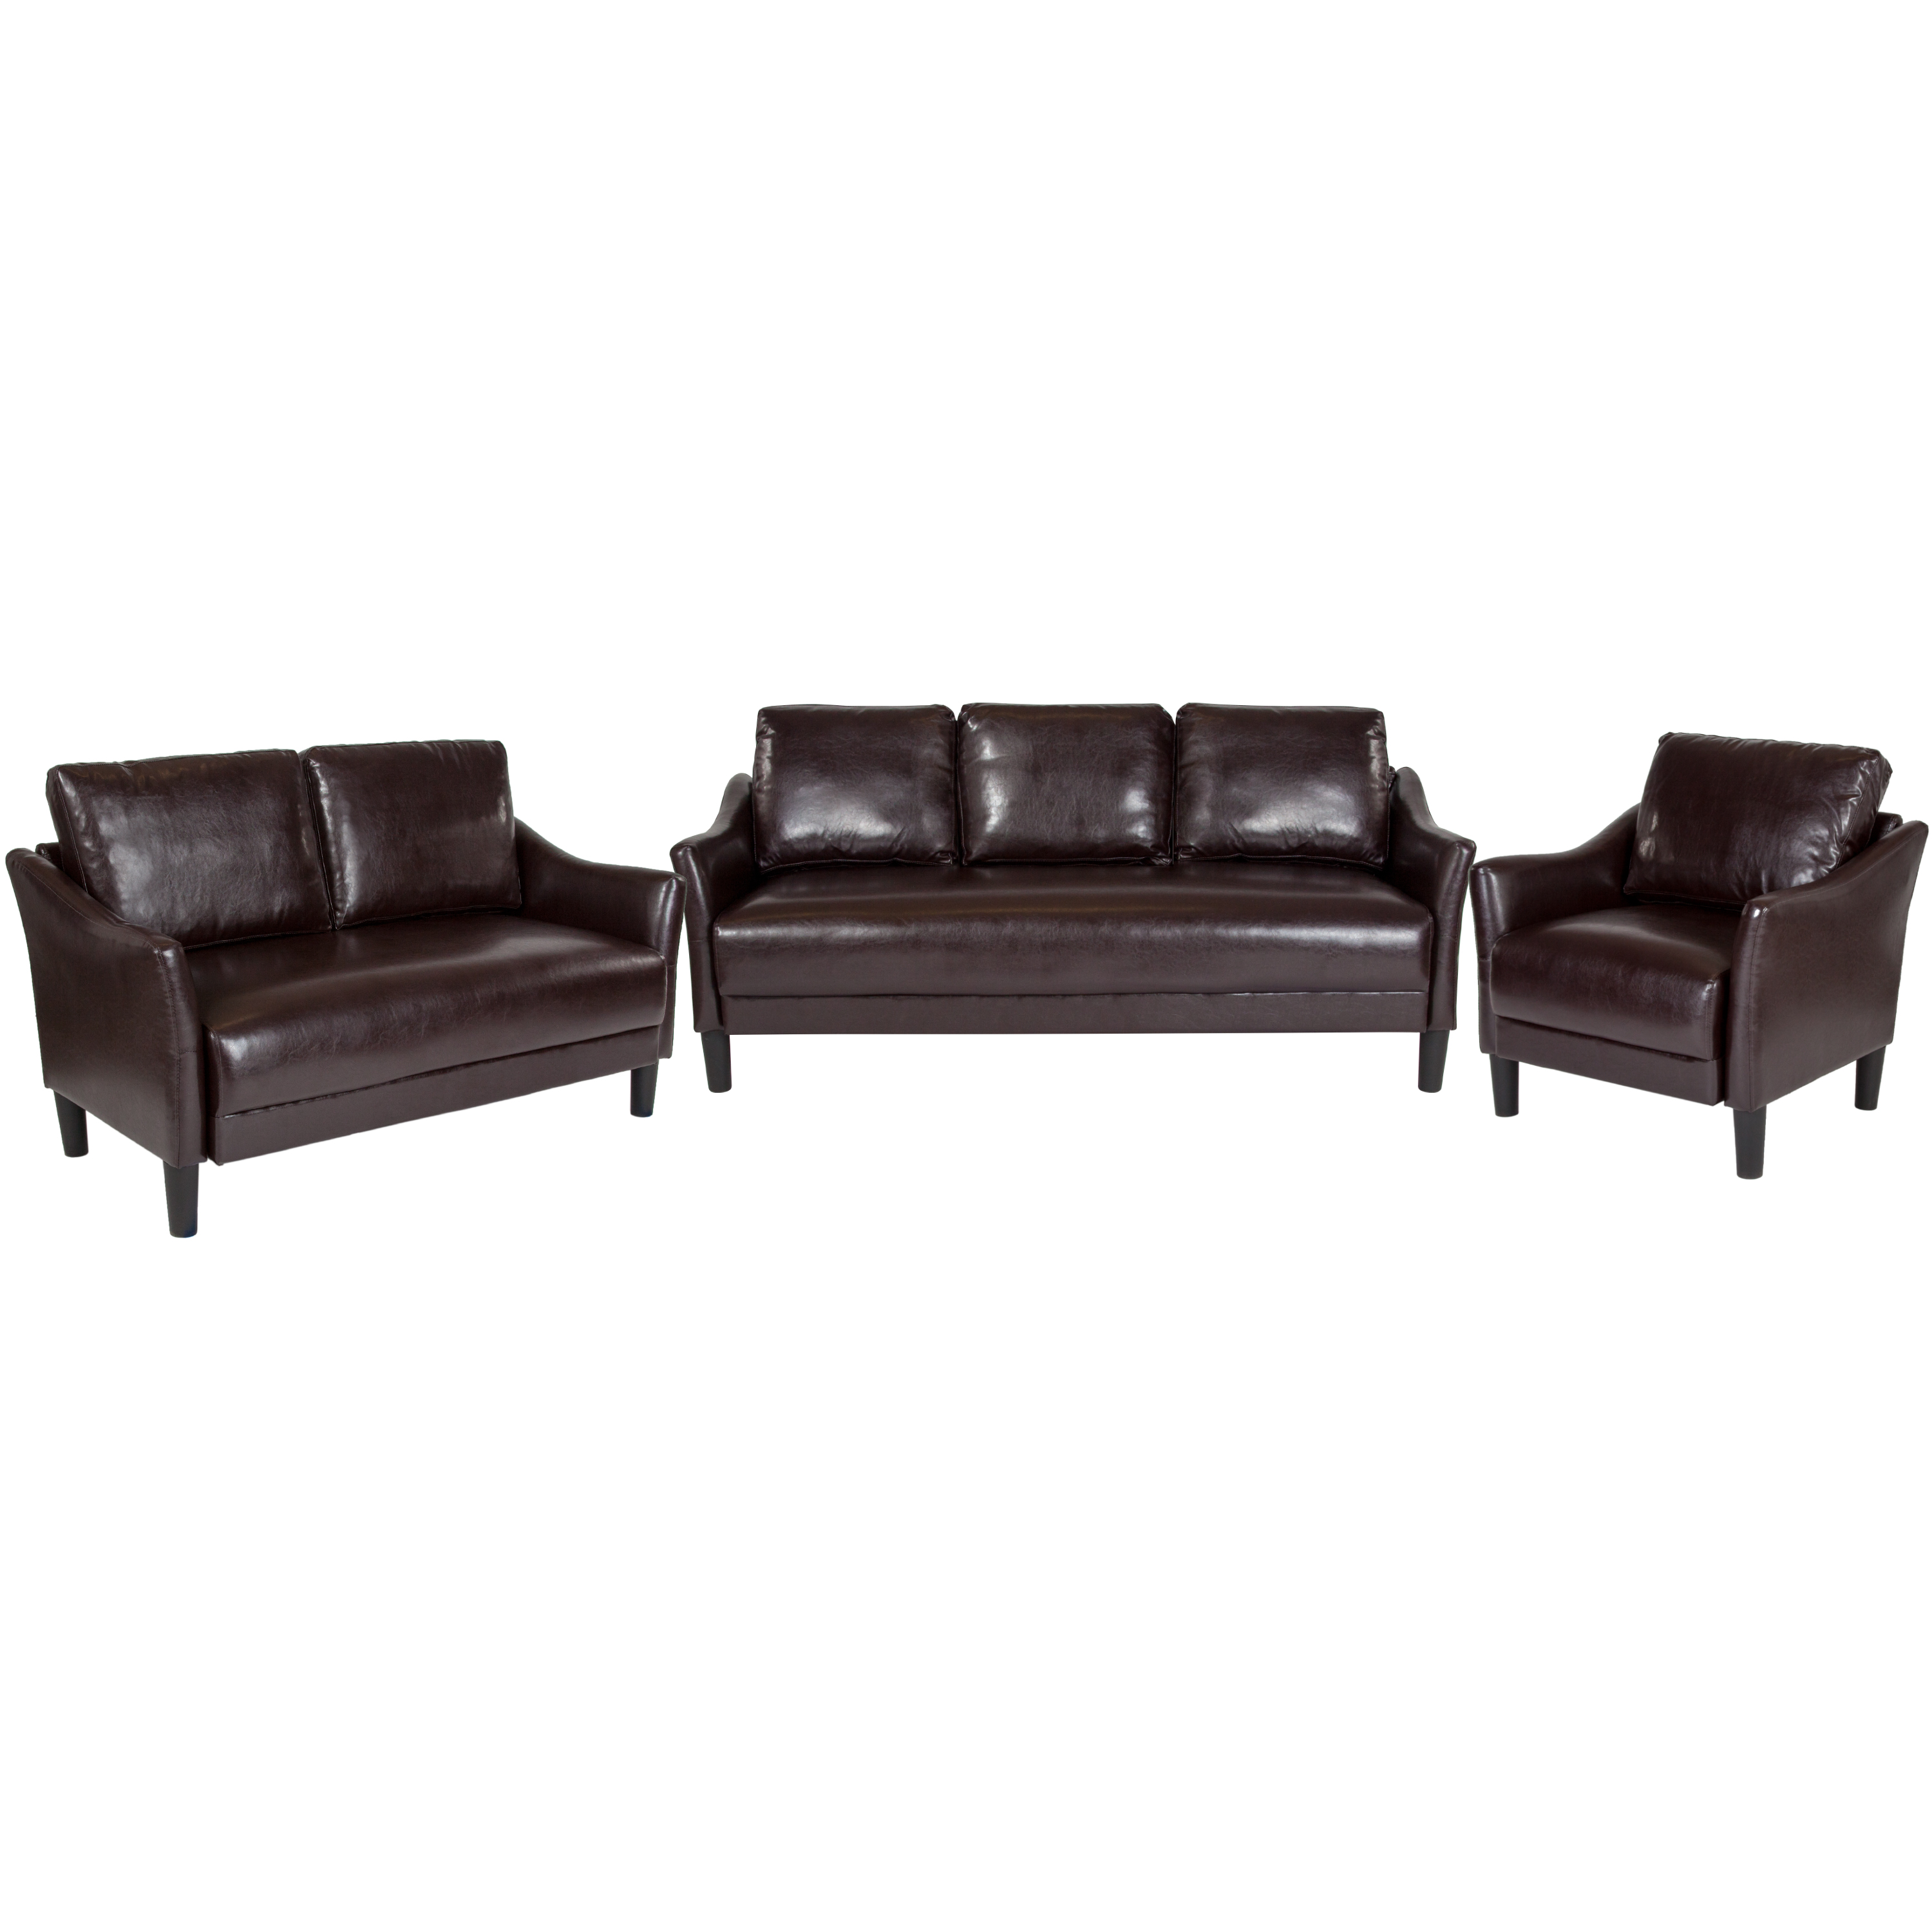 Flash Furniture Asti 3 Piece Upholstered Set in Brown LeatherSoft - image 1 of 2